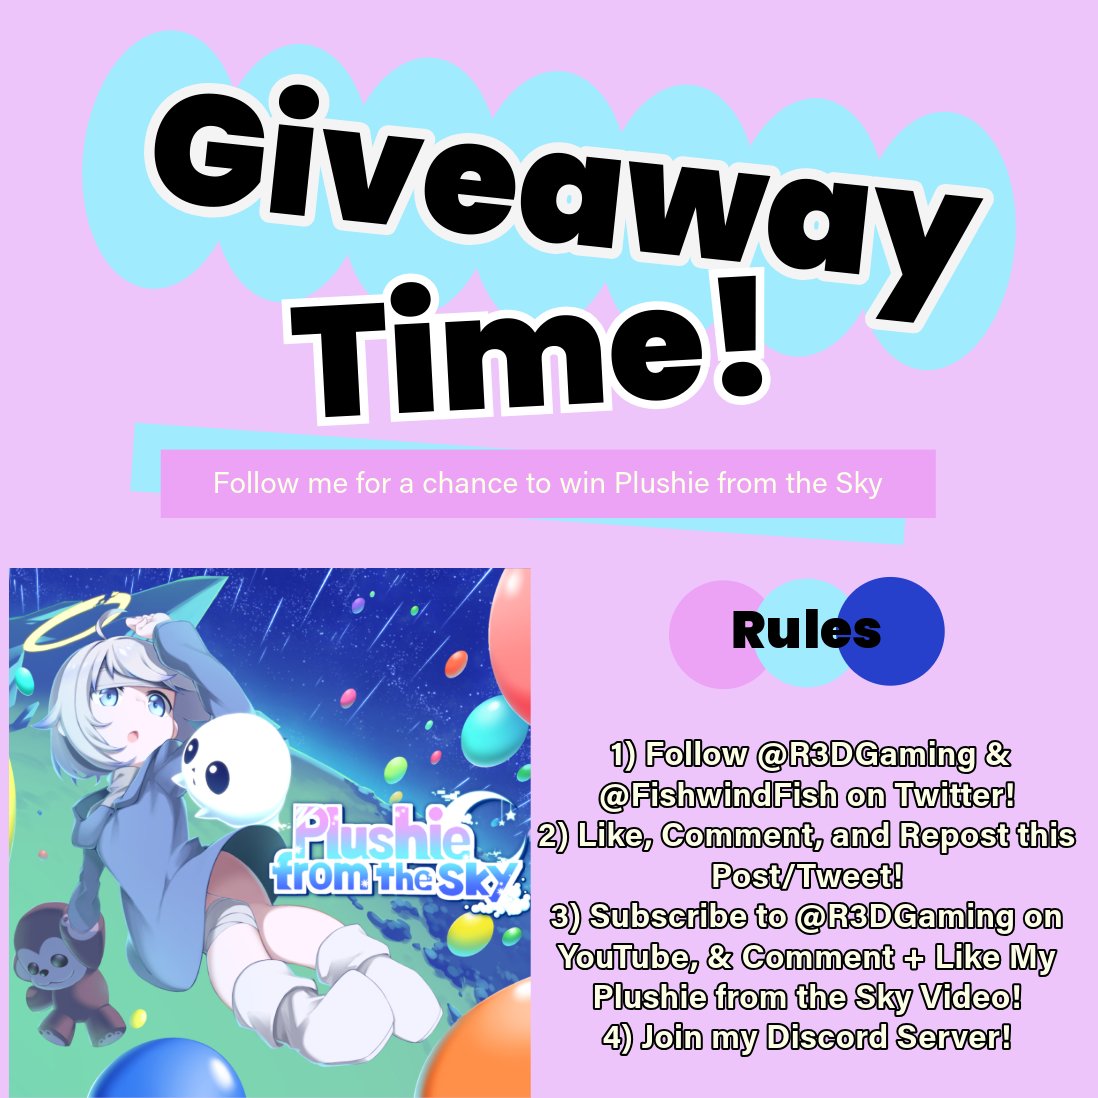 #GiveawayAlert '🧸Plushie from the Sky' 
📷 1X STEAM GAME KEY GIVEAWAY! 
Brought to you by fishwind!

• Follow the *Rules* in the picture, & I will randomly choose a winner on Tuesday, 5/14! Links below!

#Giveaway #Steam #GameKeys #FreeGame #FreeSteamGames #plushiefromthesky